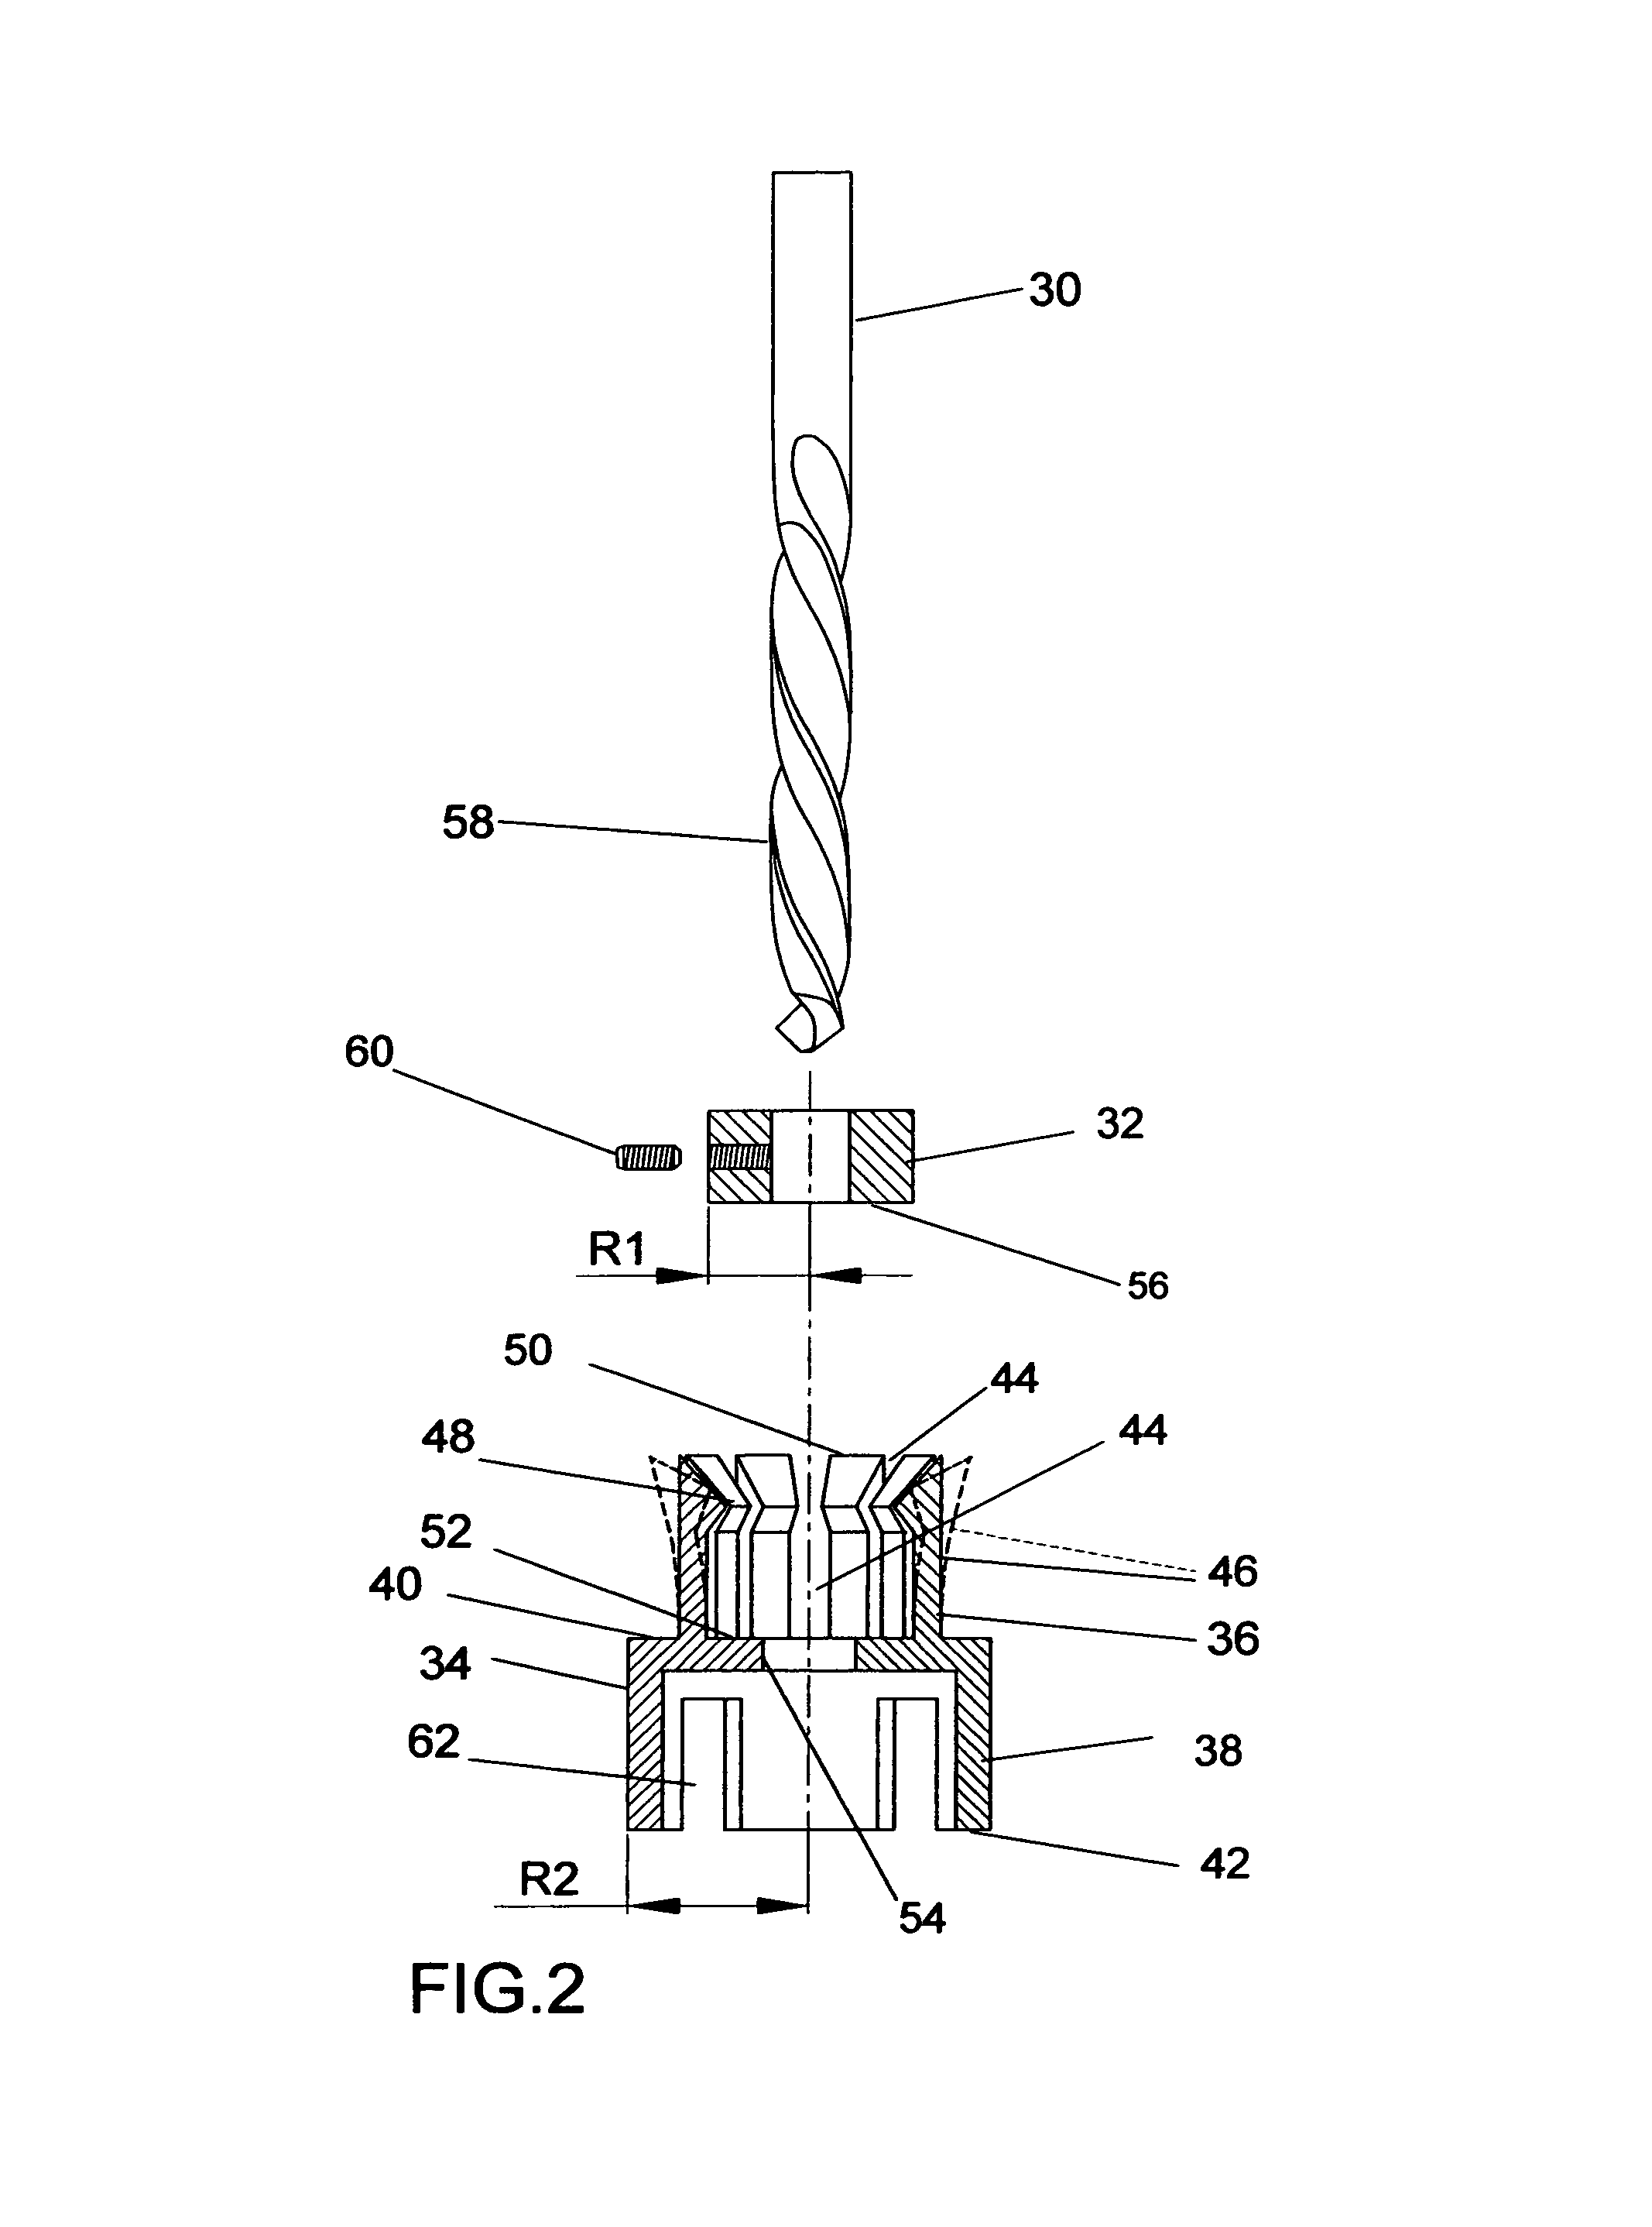 Depth limiting device for a boring tool